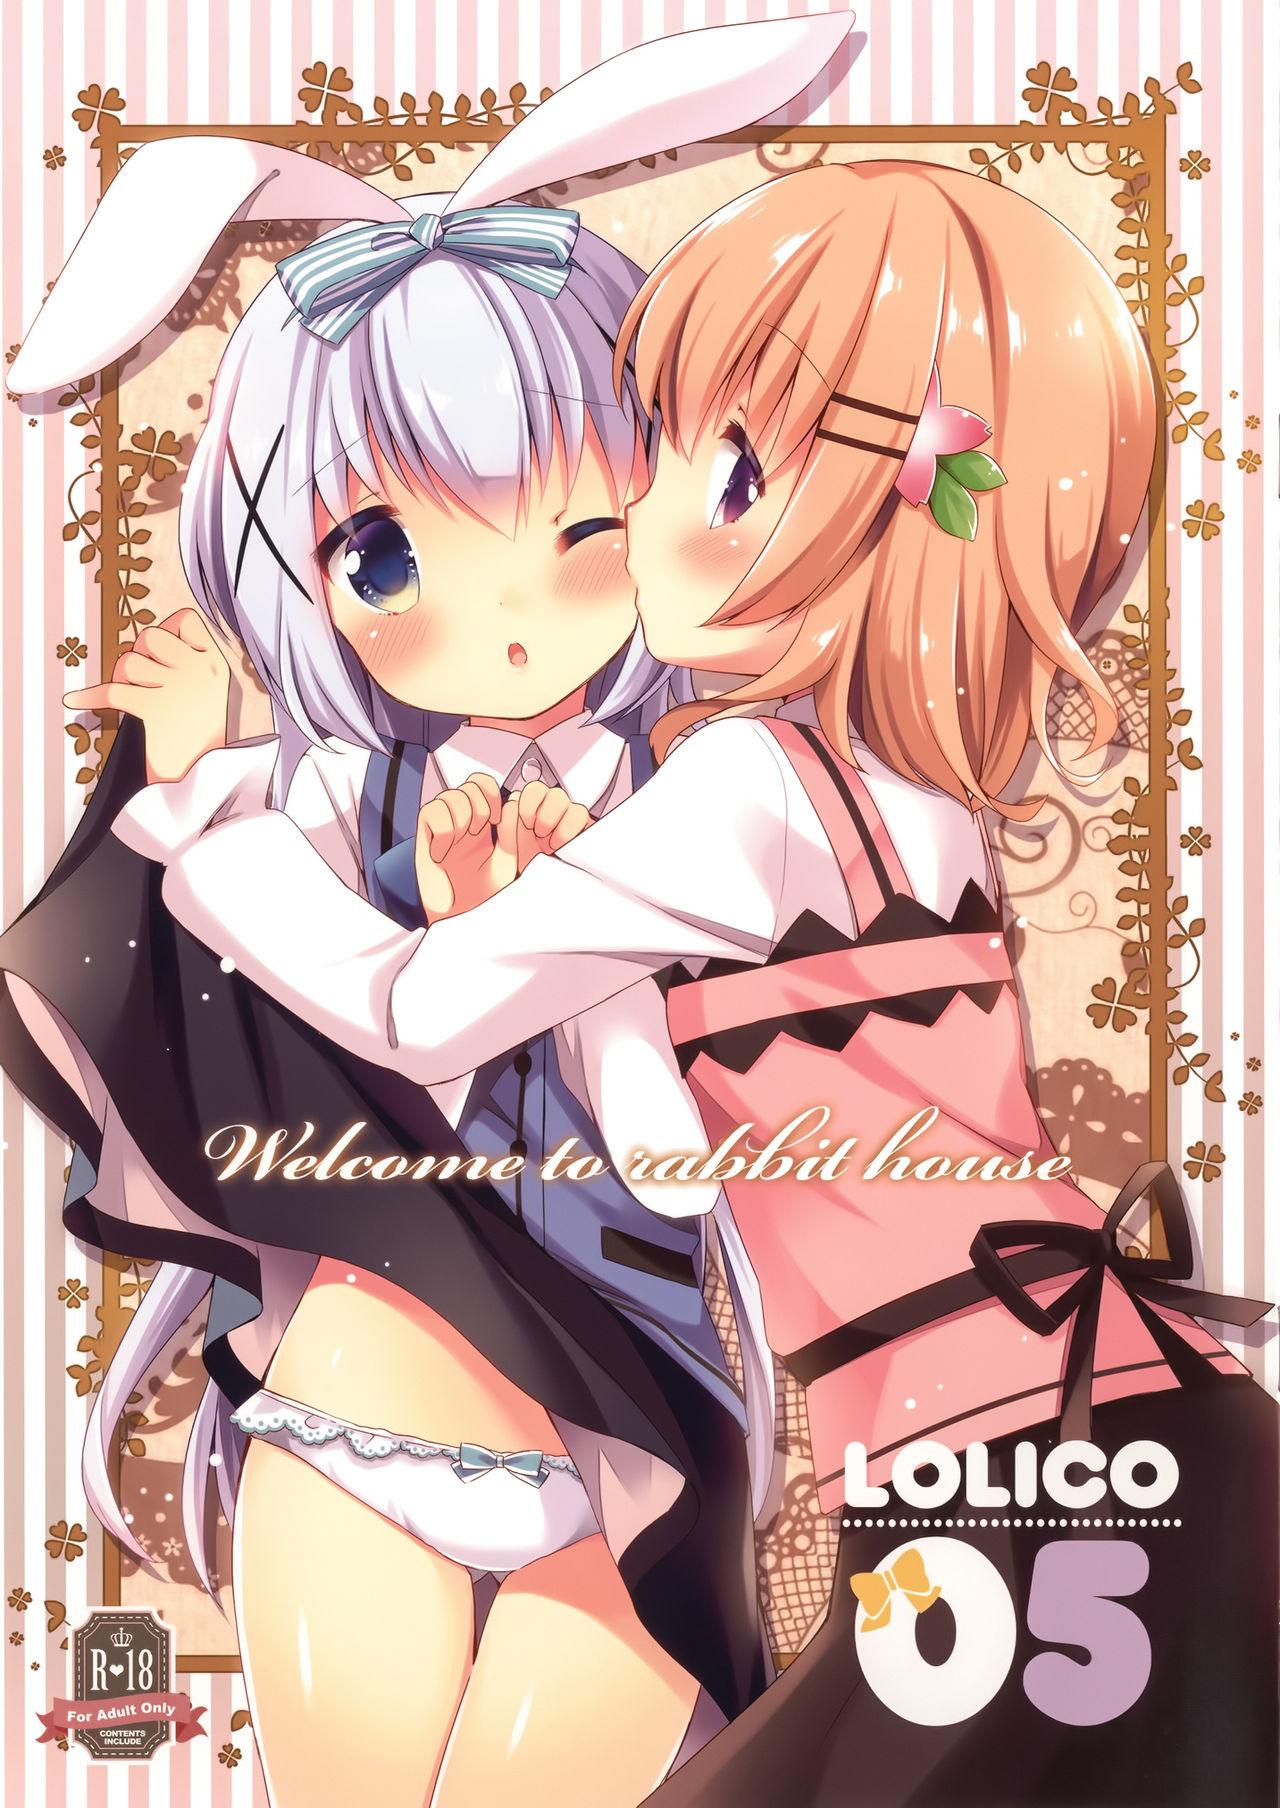 Welcome to rabbit house LoliCo05 1